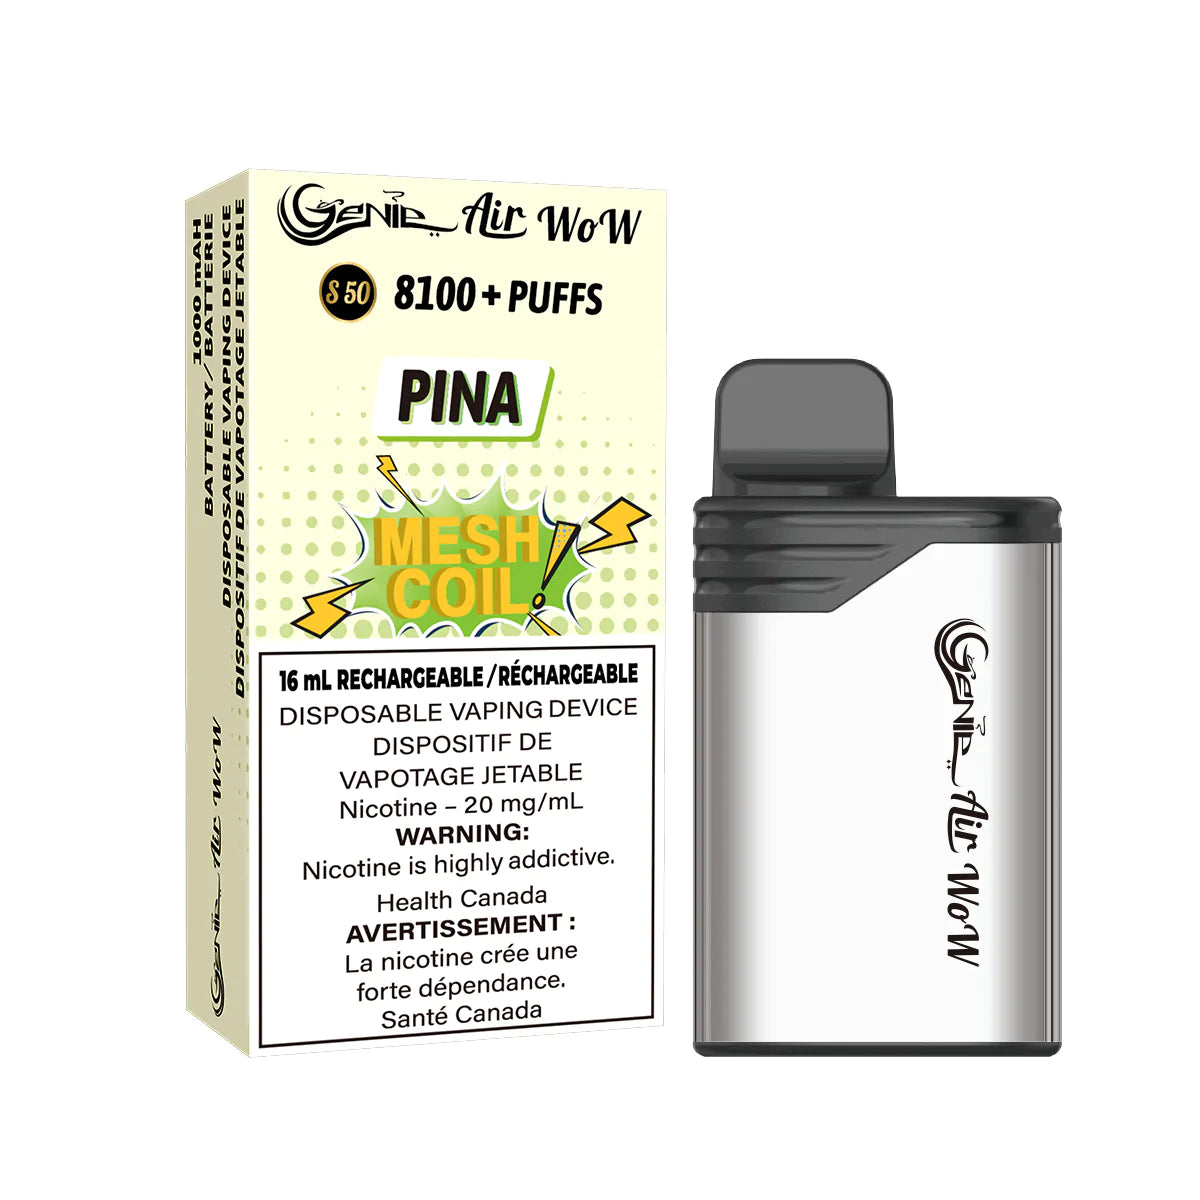 GENIE AIR WOW - PINA (SYNTHETIC)